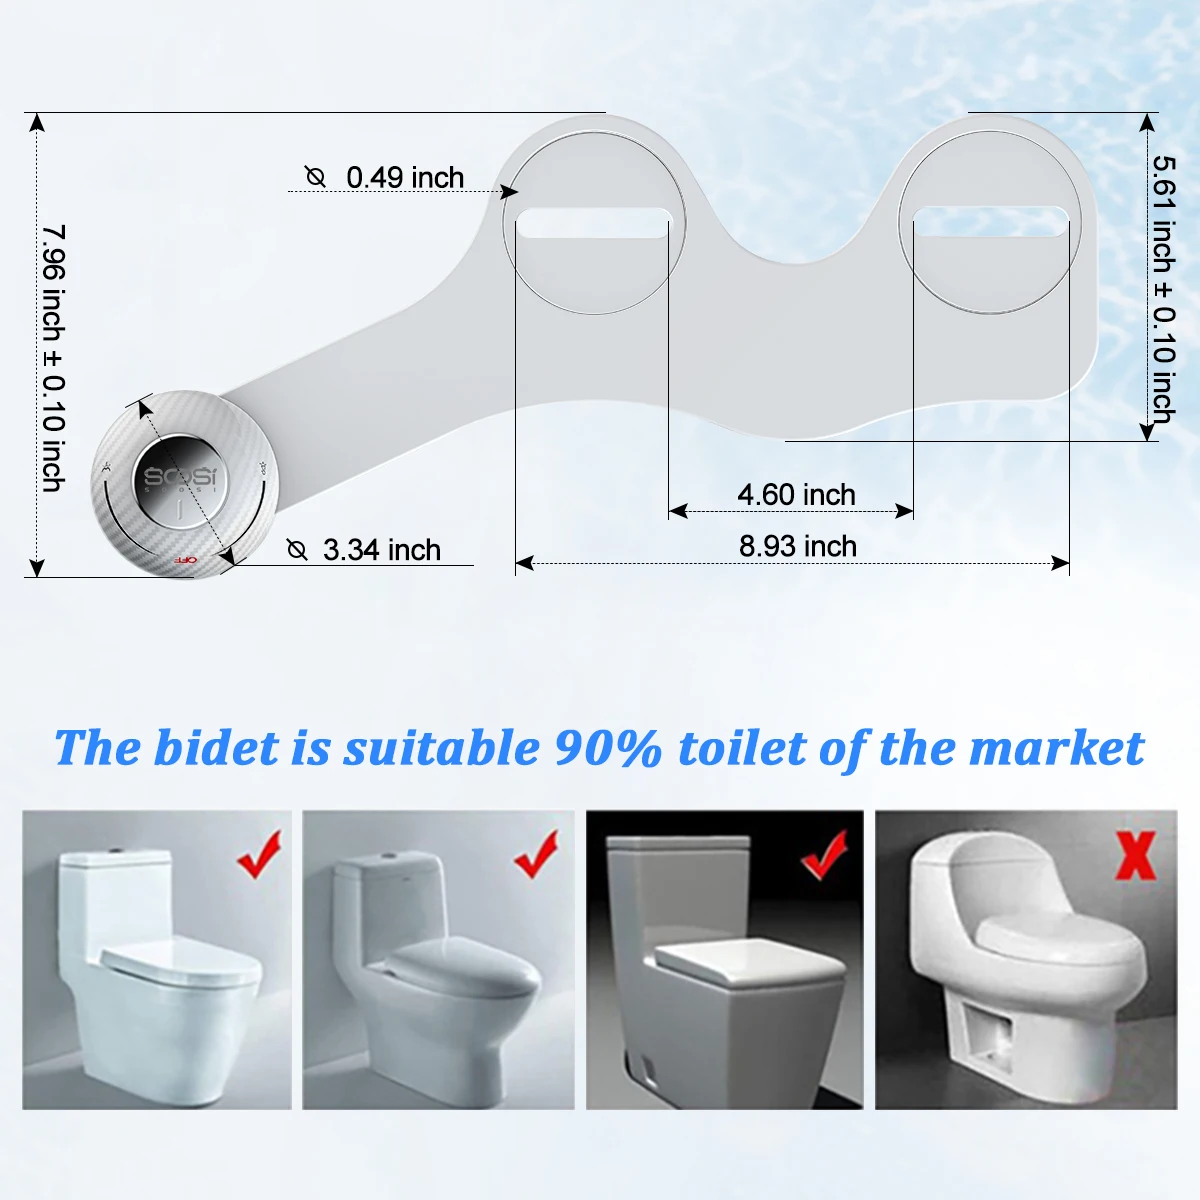 New Soosi Bidet Ultra-Thin Non-Electric Dual Nozzle Sprayer  Adjustable Water Press Personal Hygiene Easy Install